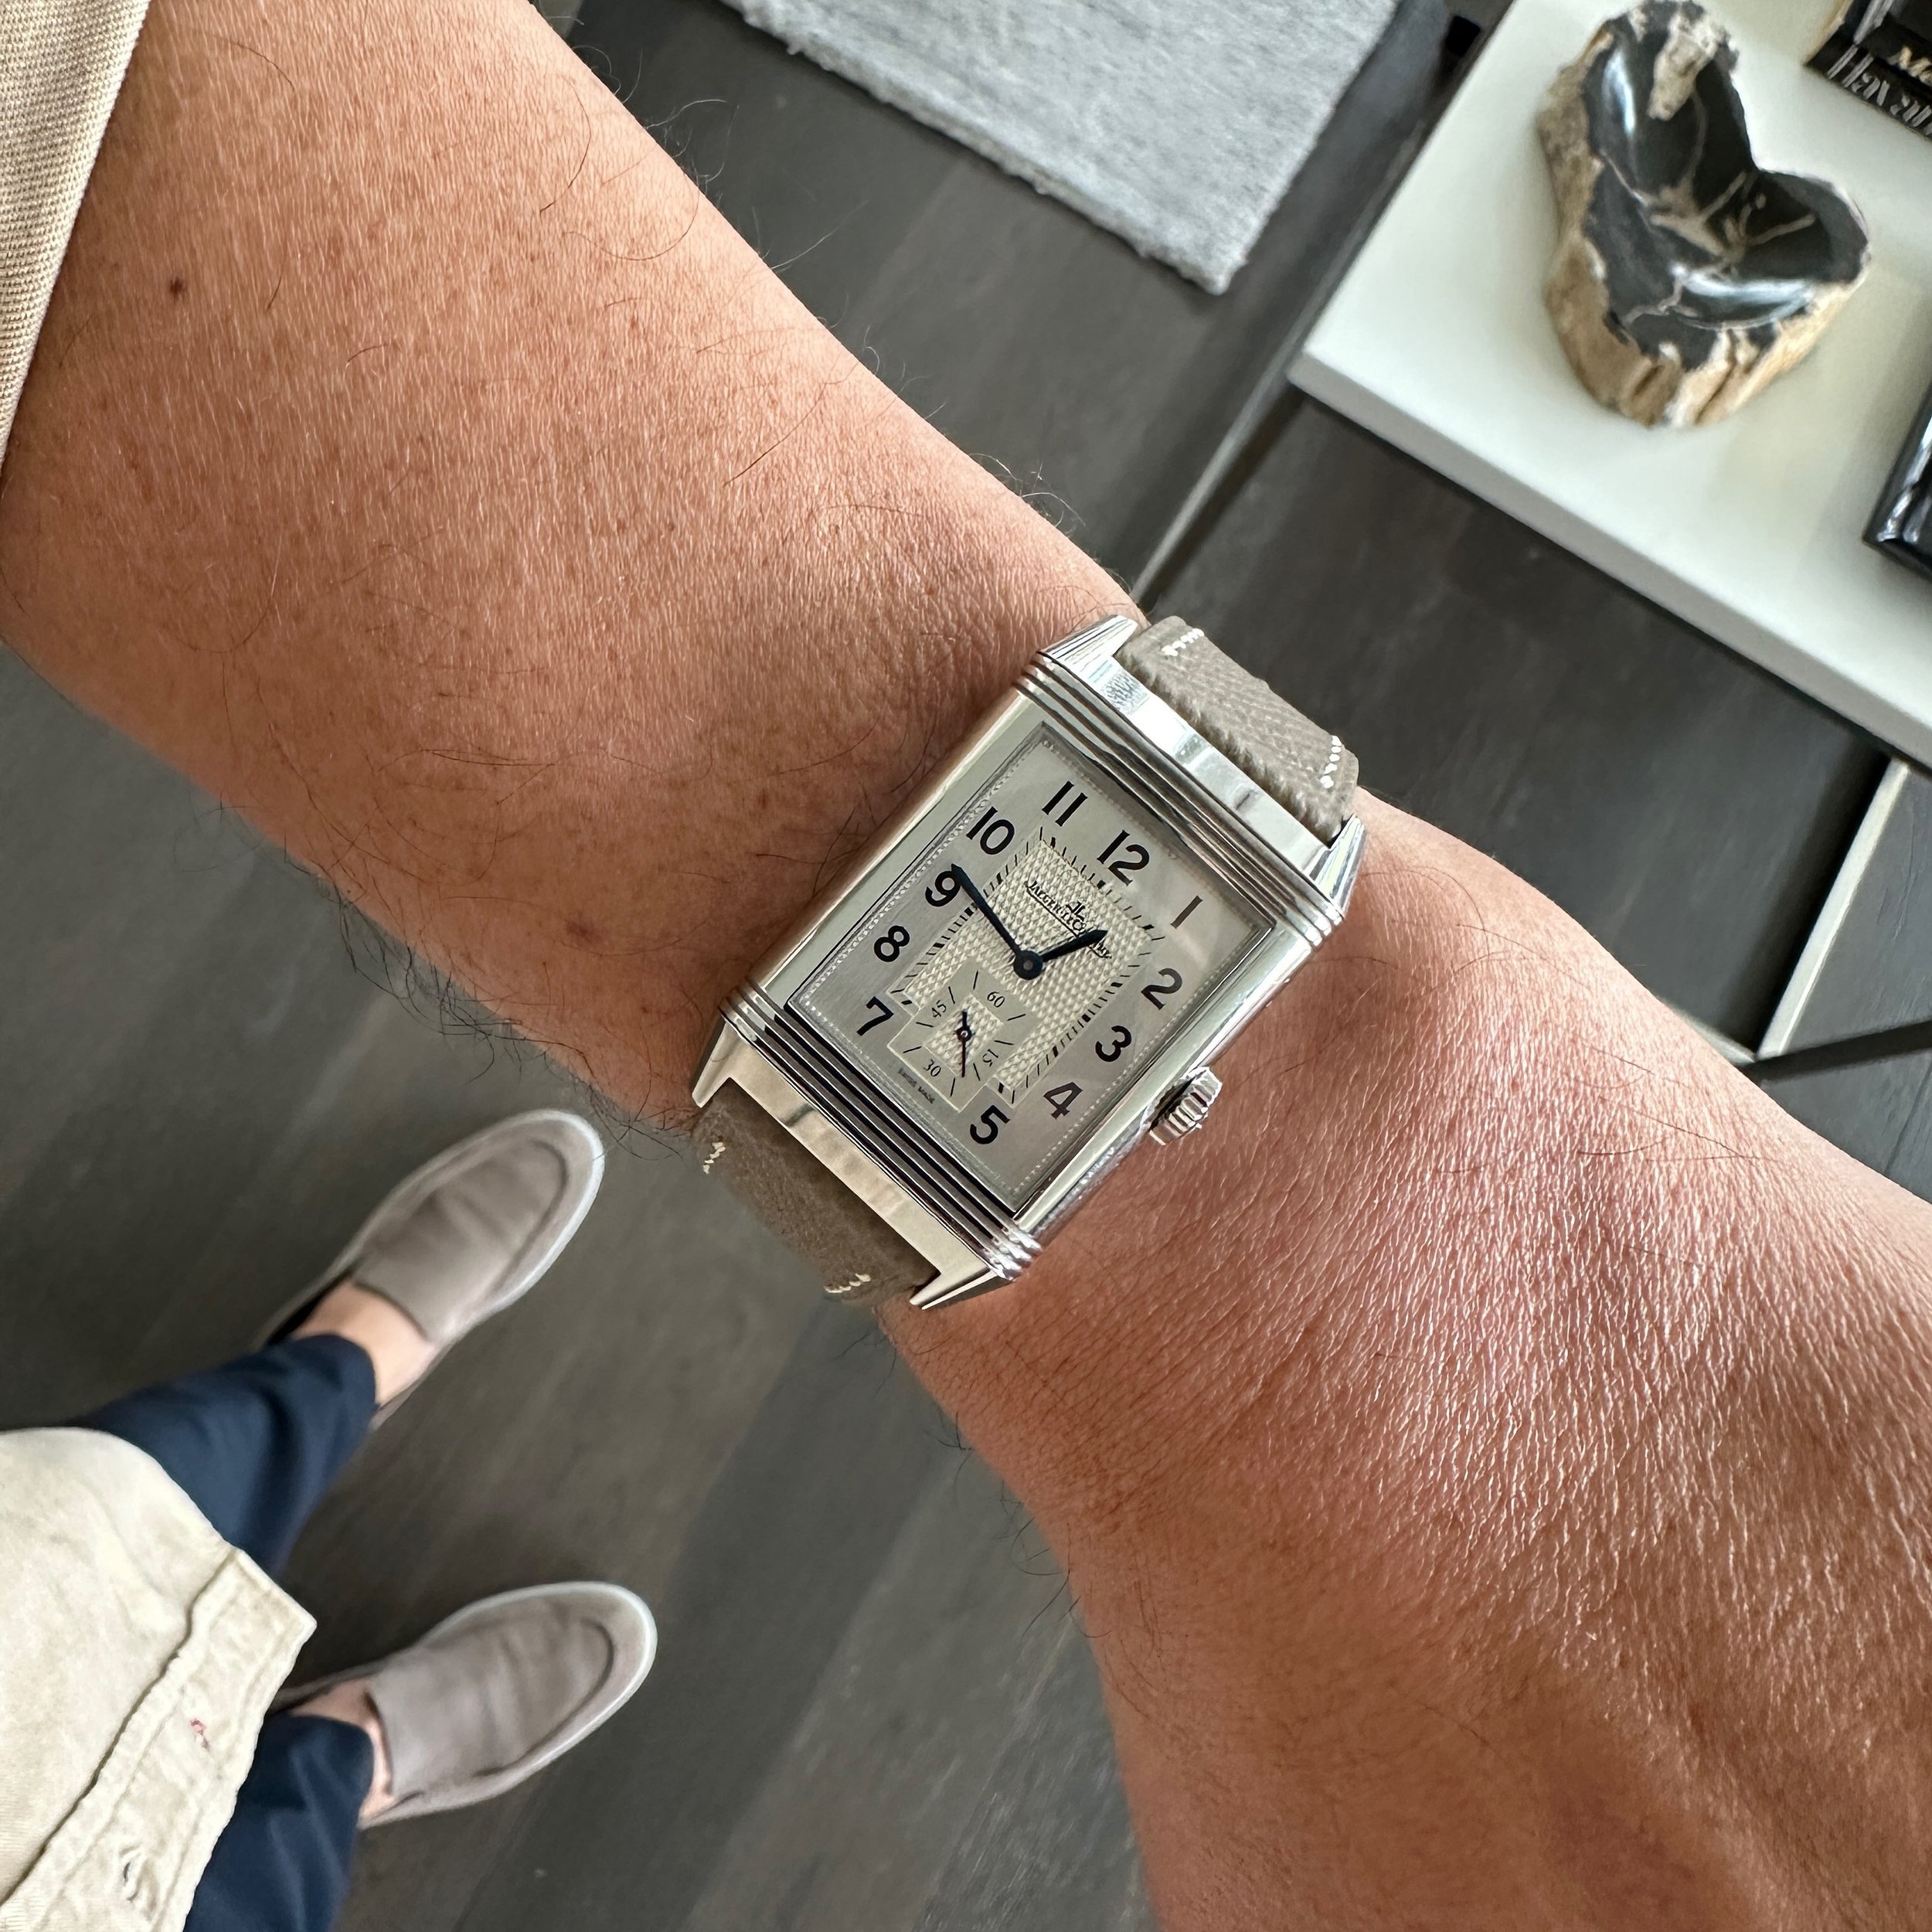 Taupe strap for the win on the @jaegerlecoultre Reverso Duoface Small Seconds Dual Time. #jaegerlecoultre #jaeger #reverso #reversoduoface #jlcreverso #dualtime #watches #luxurywatch #watchlife #watchcollectinglifestyle #timepieces #taupestrap #jlc